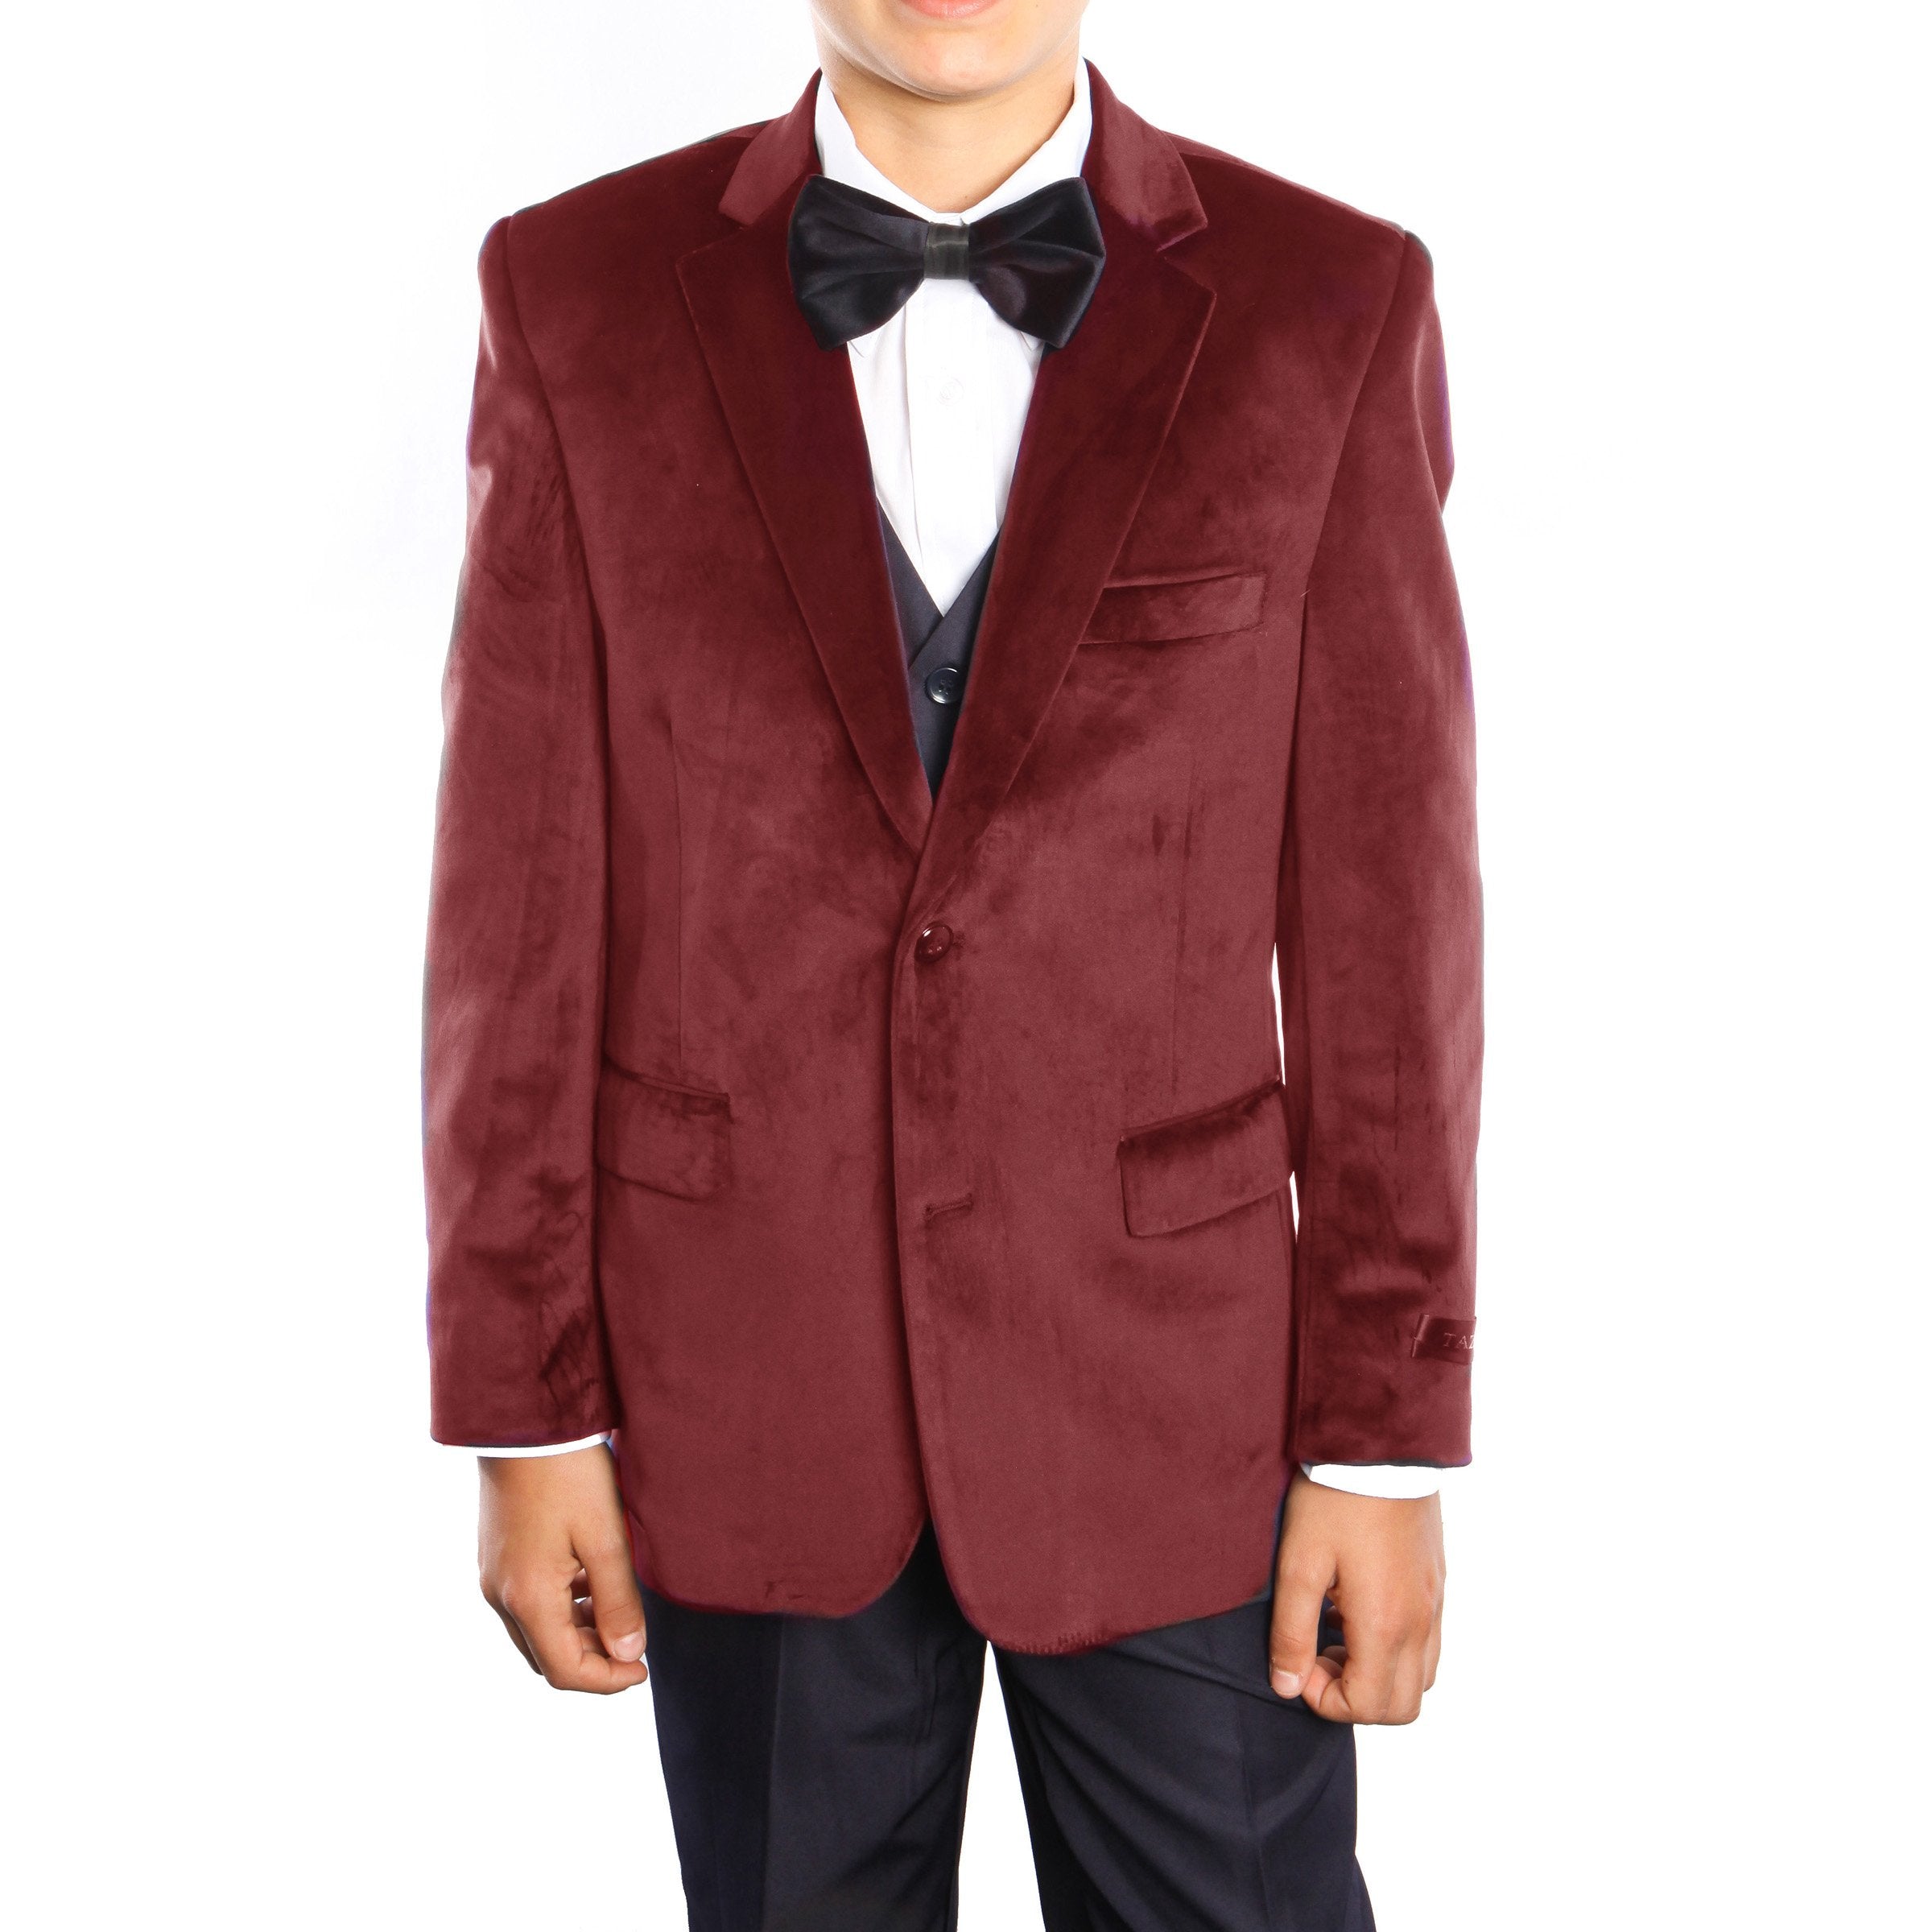 3-Piece Velvet Jacket Set With Shirt & Bow Tie Suits For Boy's